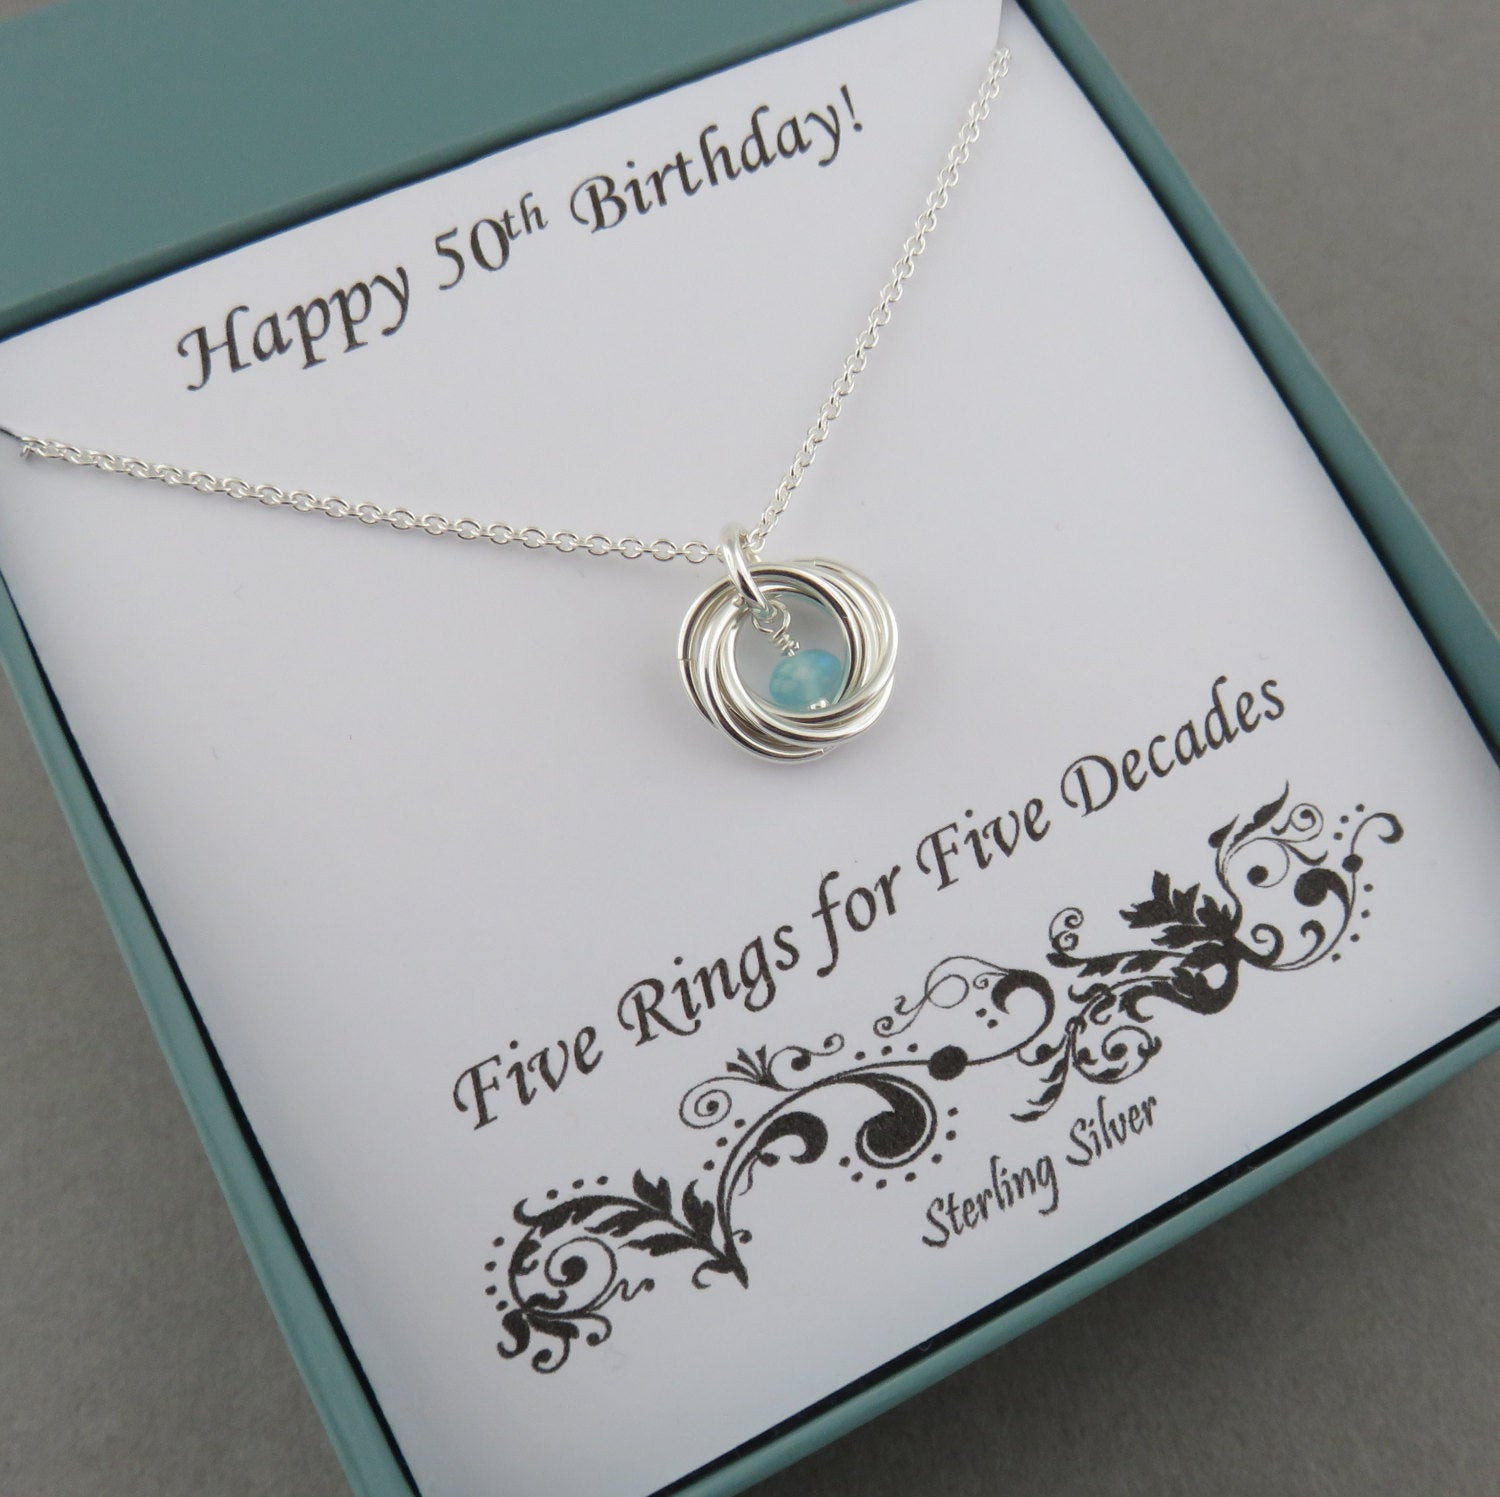 Gift Ideas 50th Birthday Woman
 50th Birthday Gift for Women Birthstone Necklace Sterling